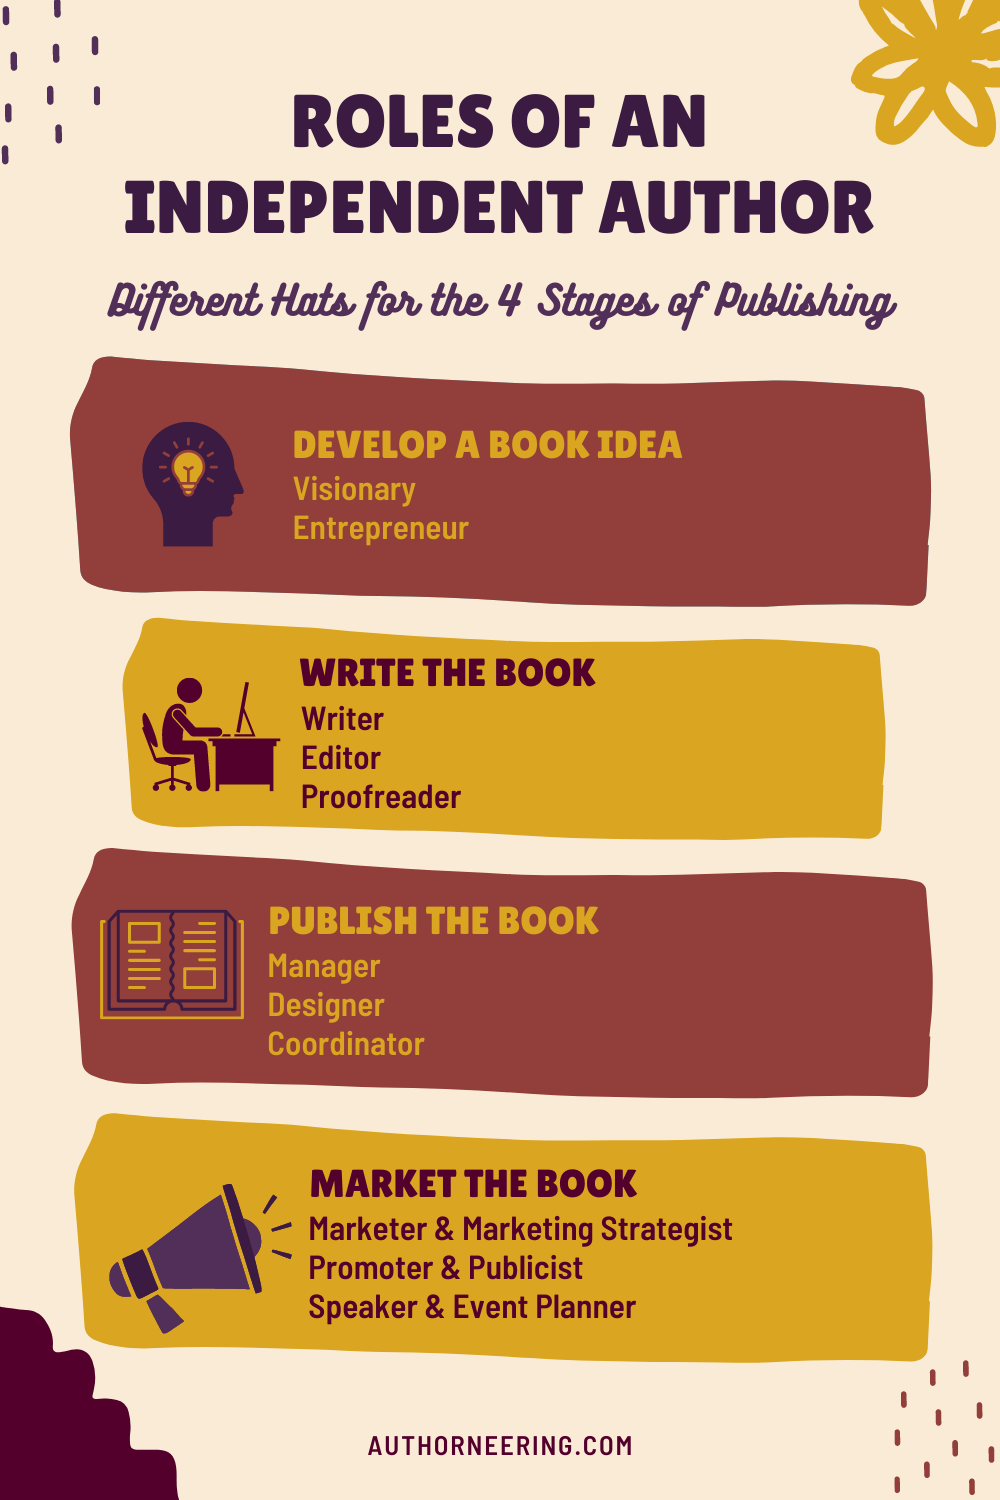 Roles of an Independent Author